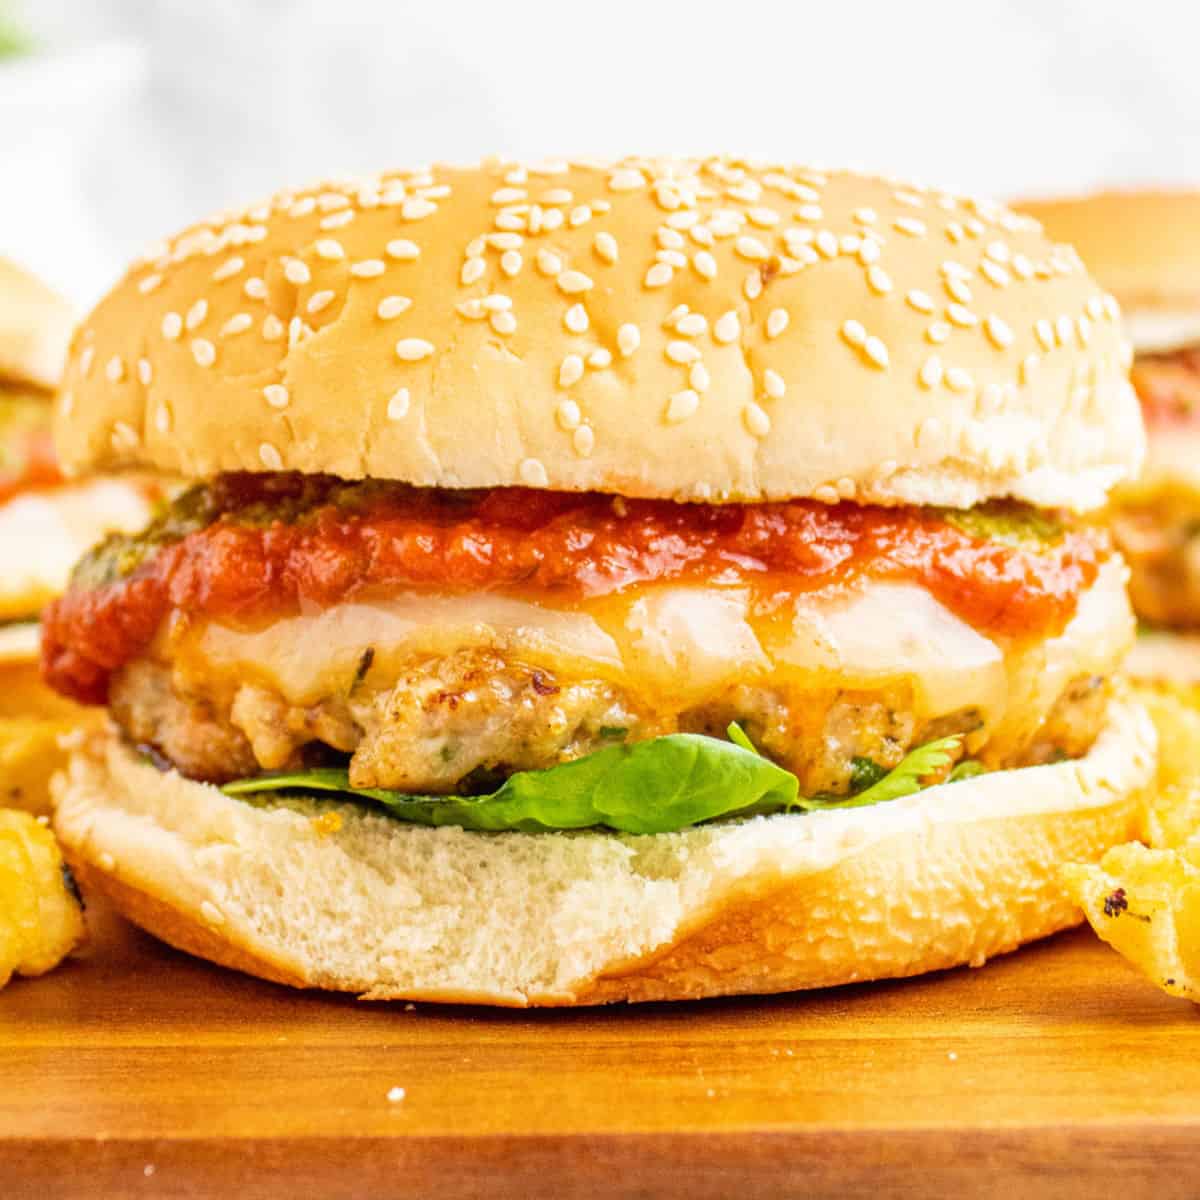 square image of an italian chicken burger on a wooden board with fries